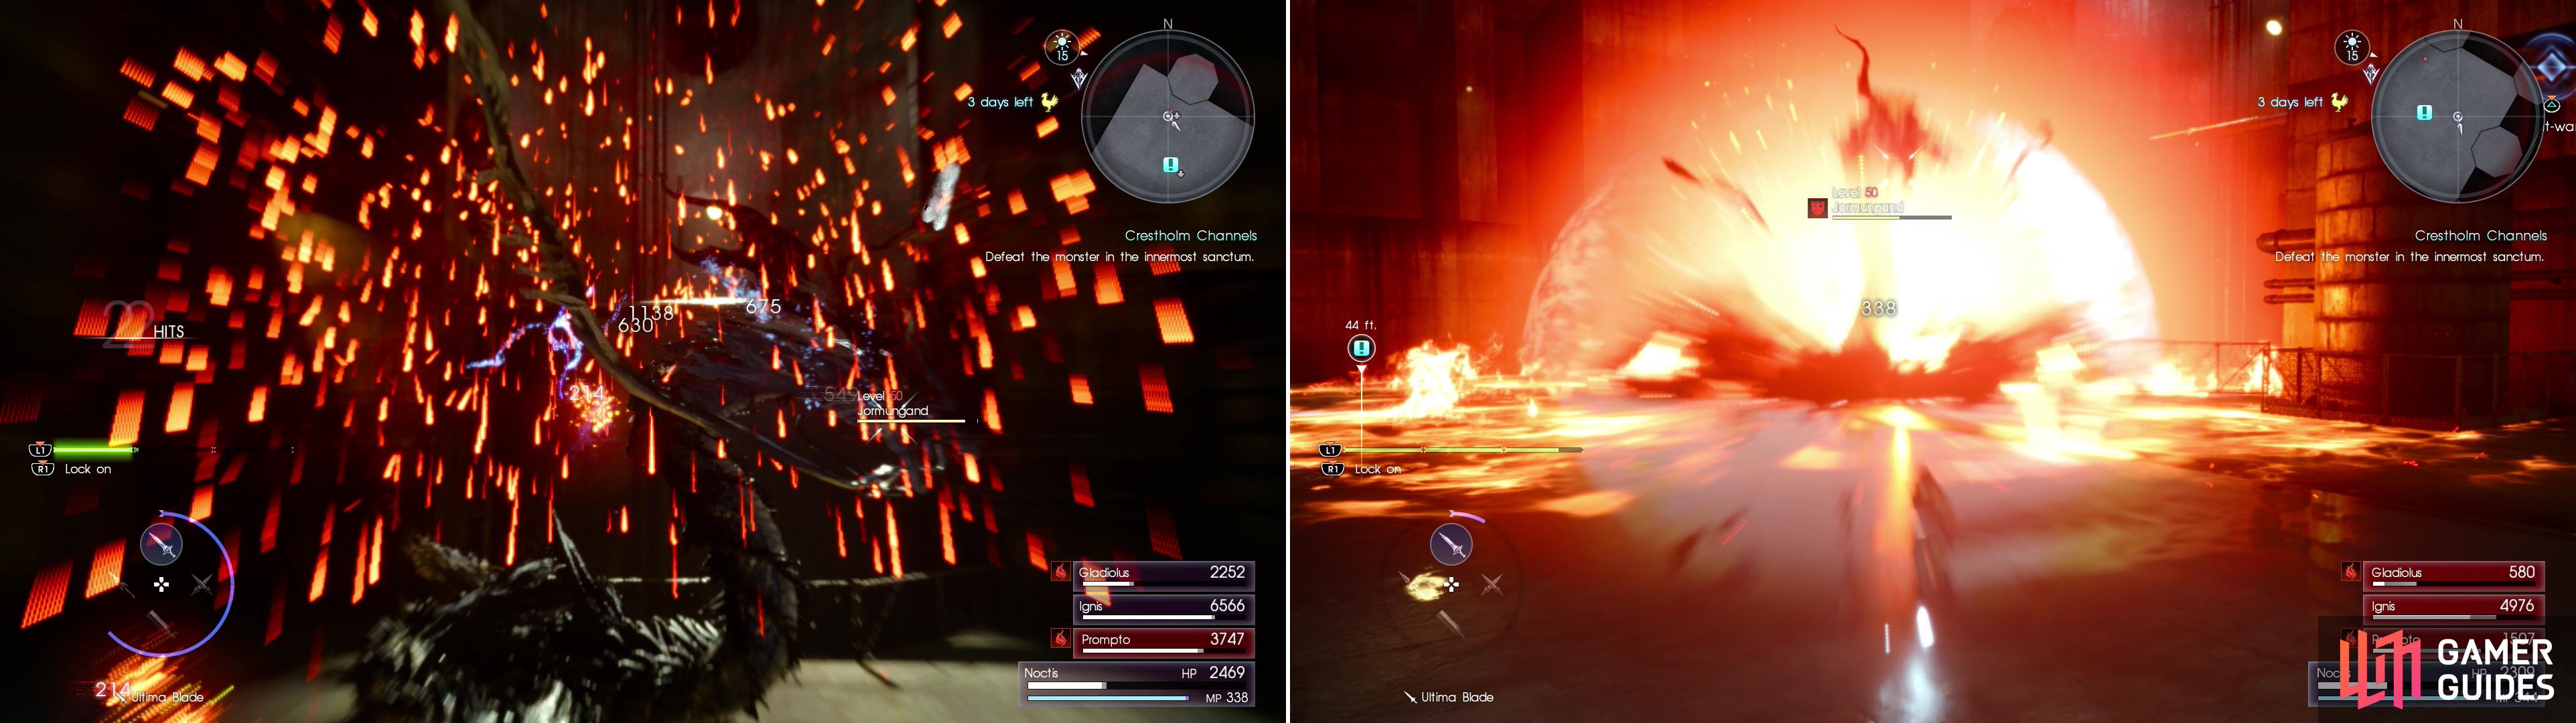 Jormungand likes using fire, including attacks like spitting fire into the air to have it rain down upon you (left), it can also create a blast of fiery energy centered on itself (right).